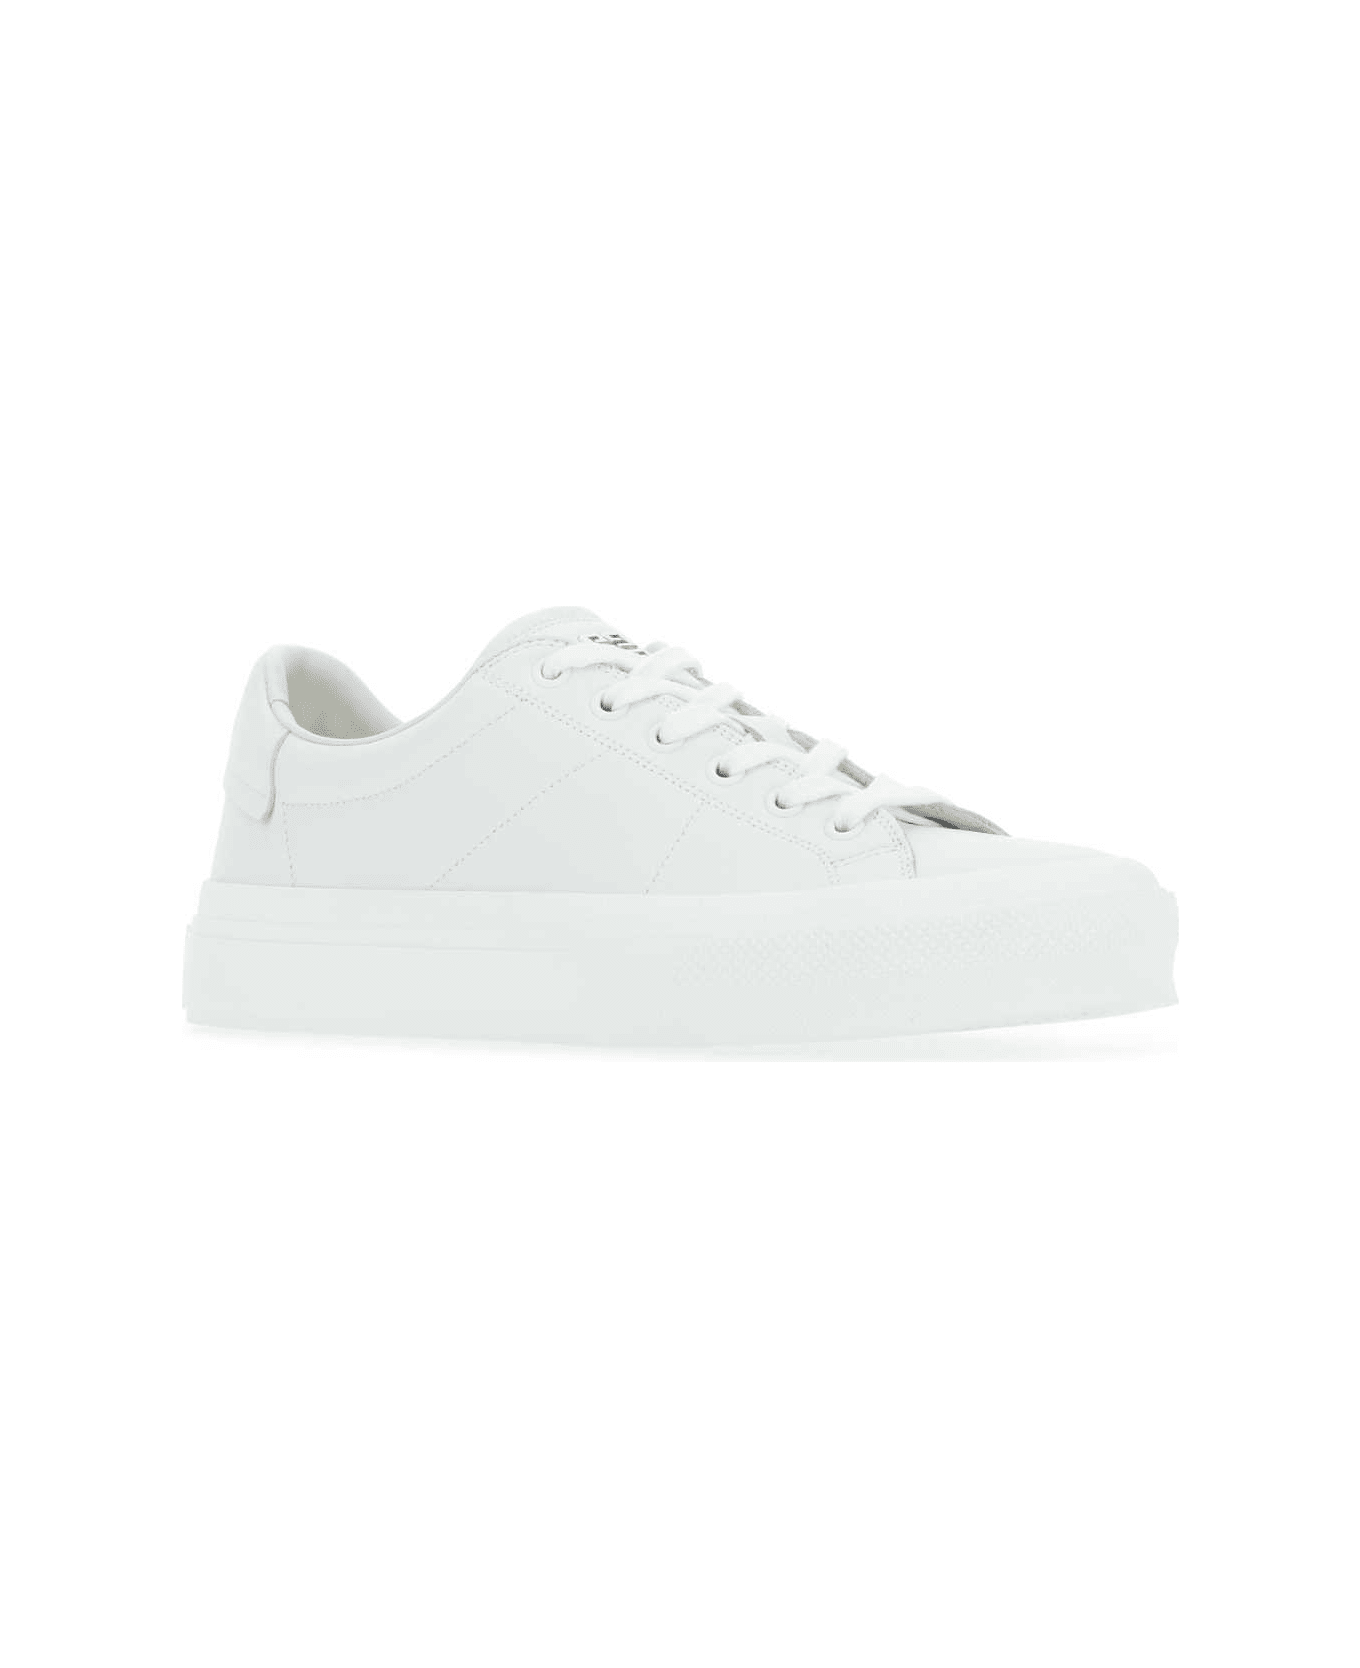 Givenchy White Leather City Light Sneakers - 100